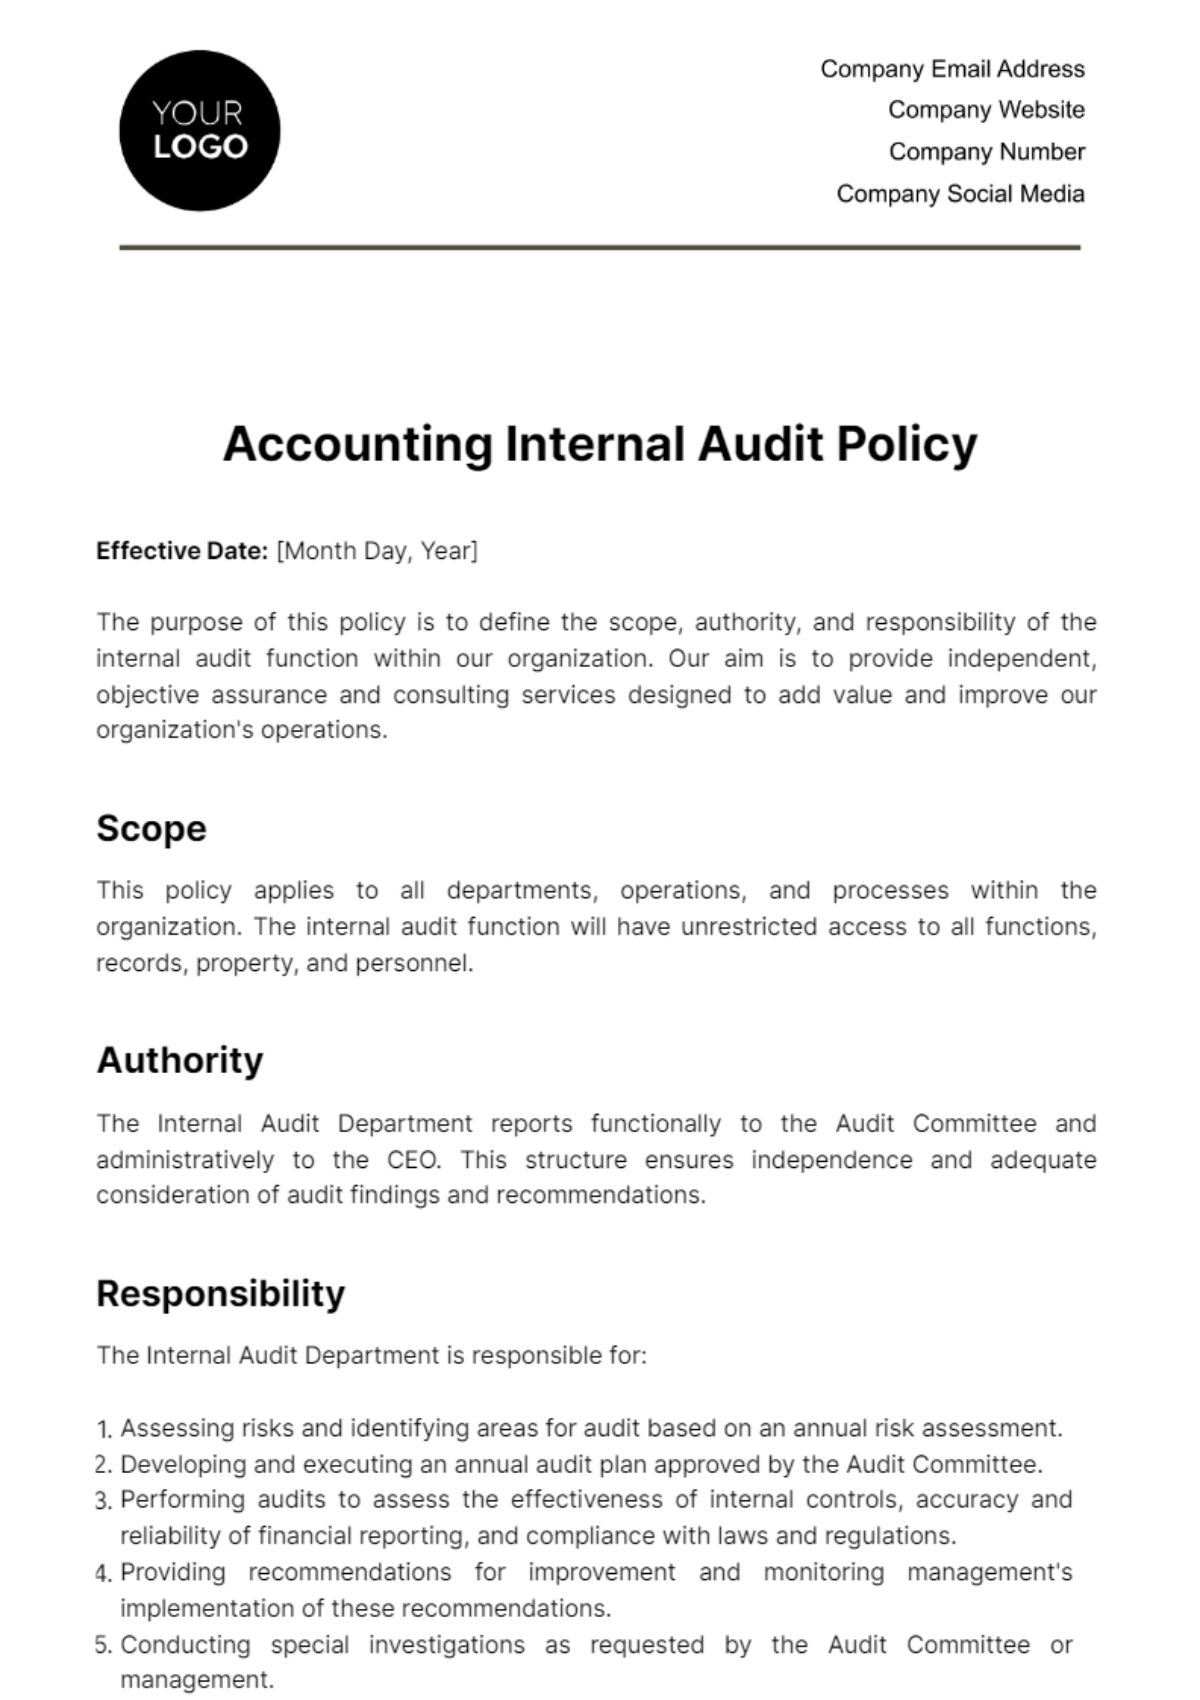 Accounting Internal Audit Policy Template